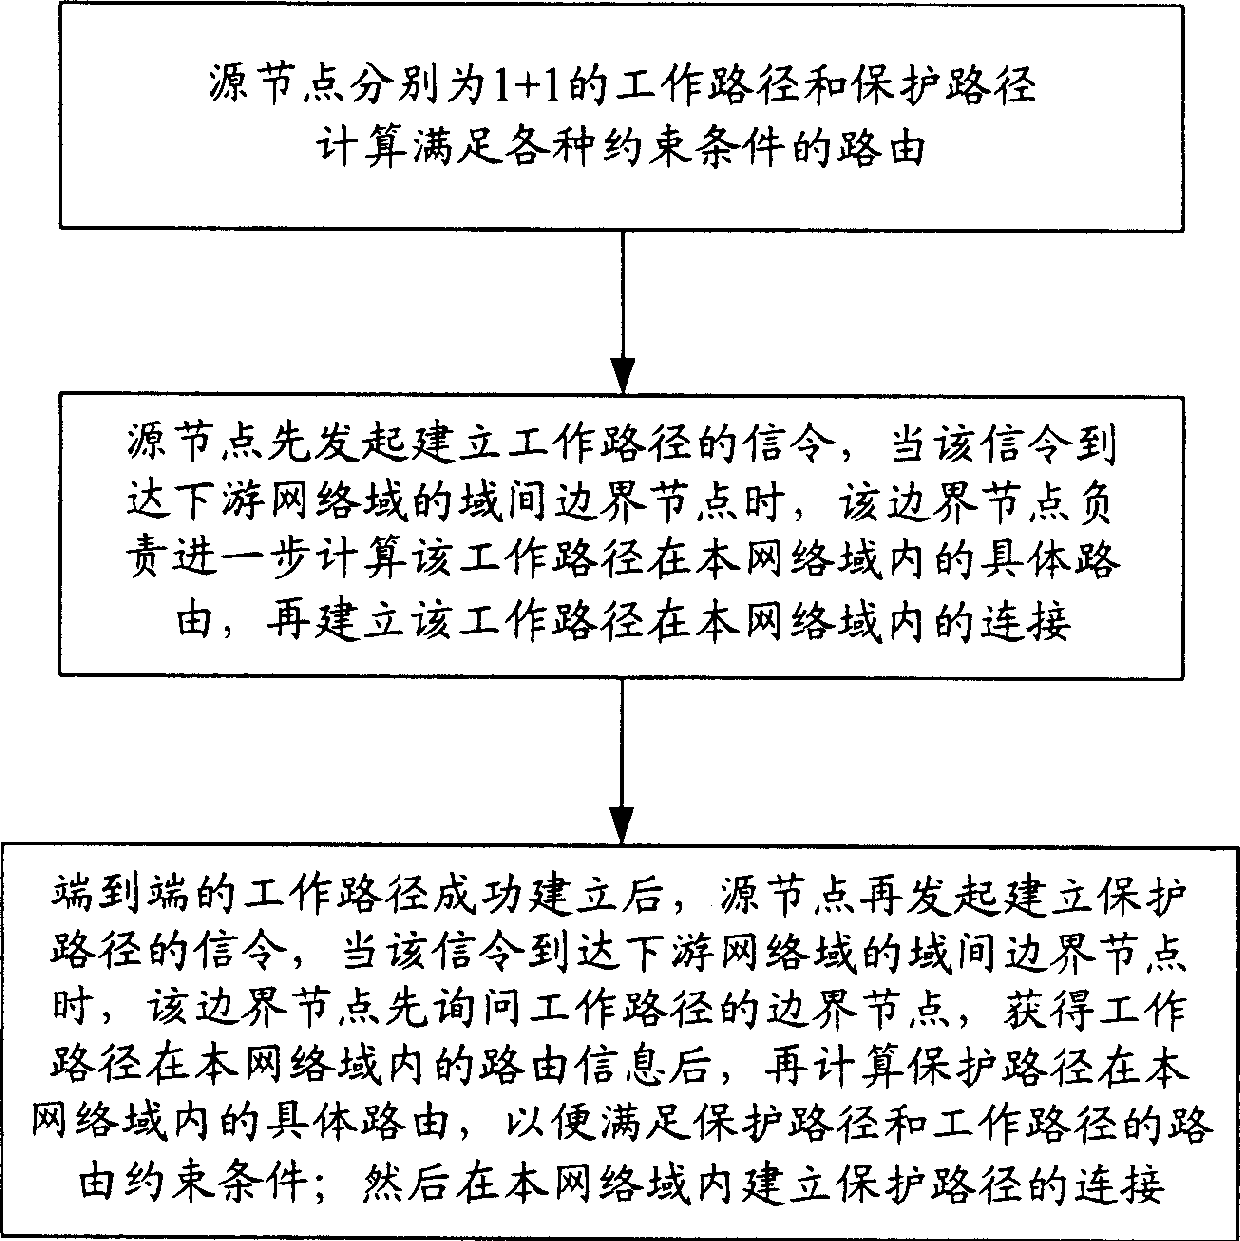 Cross-over end-to-end connection setting method for main apparatus protection in automatic exchange optical network